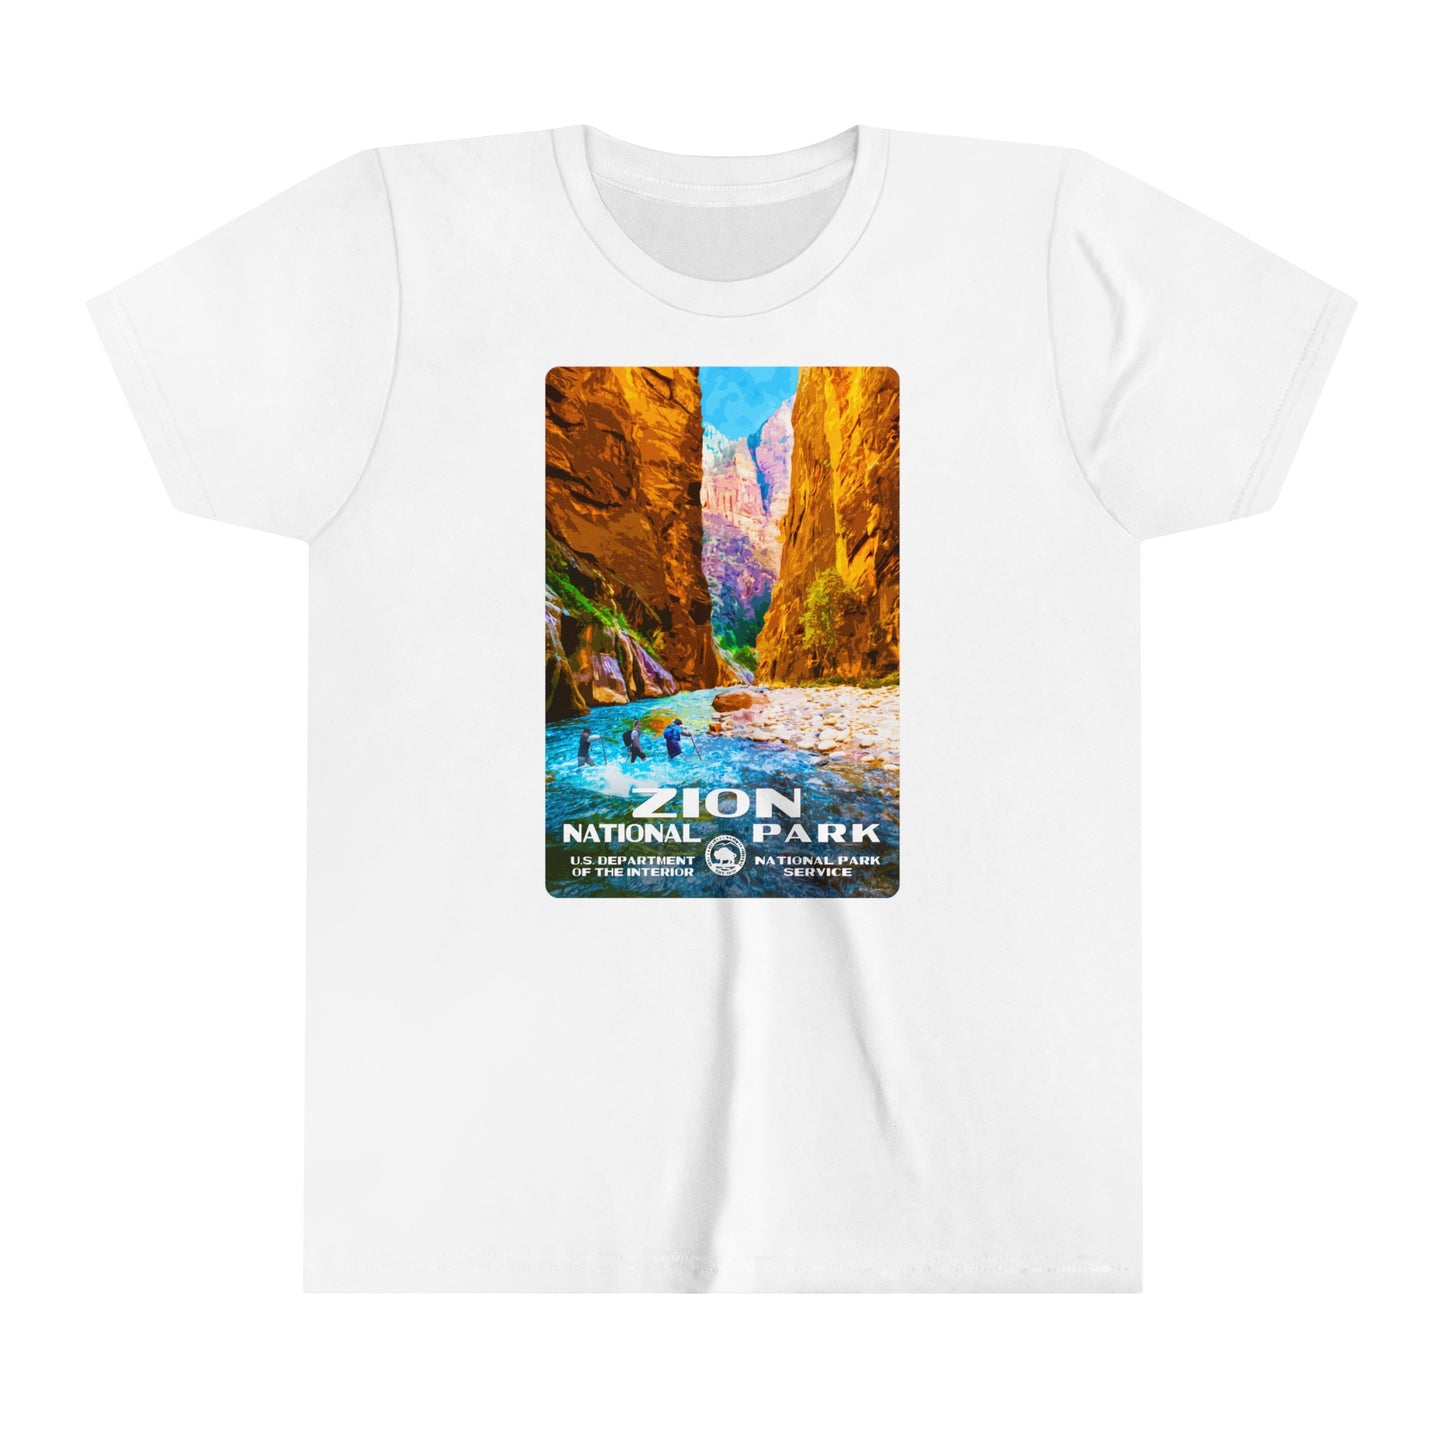 Copy of Zion National Park (The Narrows) Kids' T-Shirt